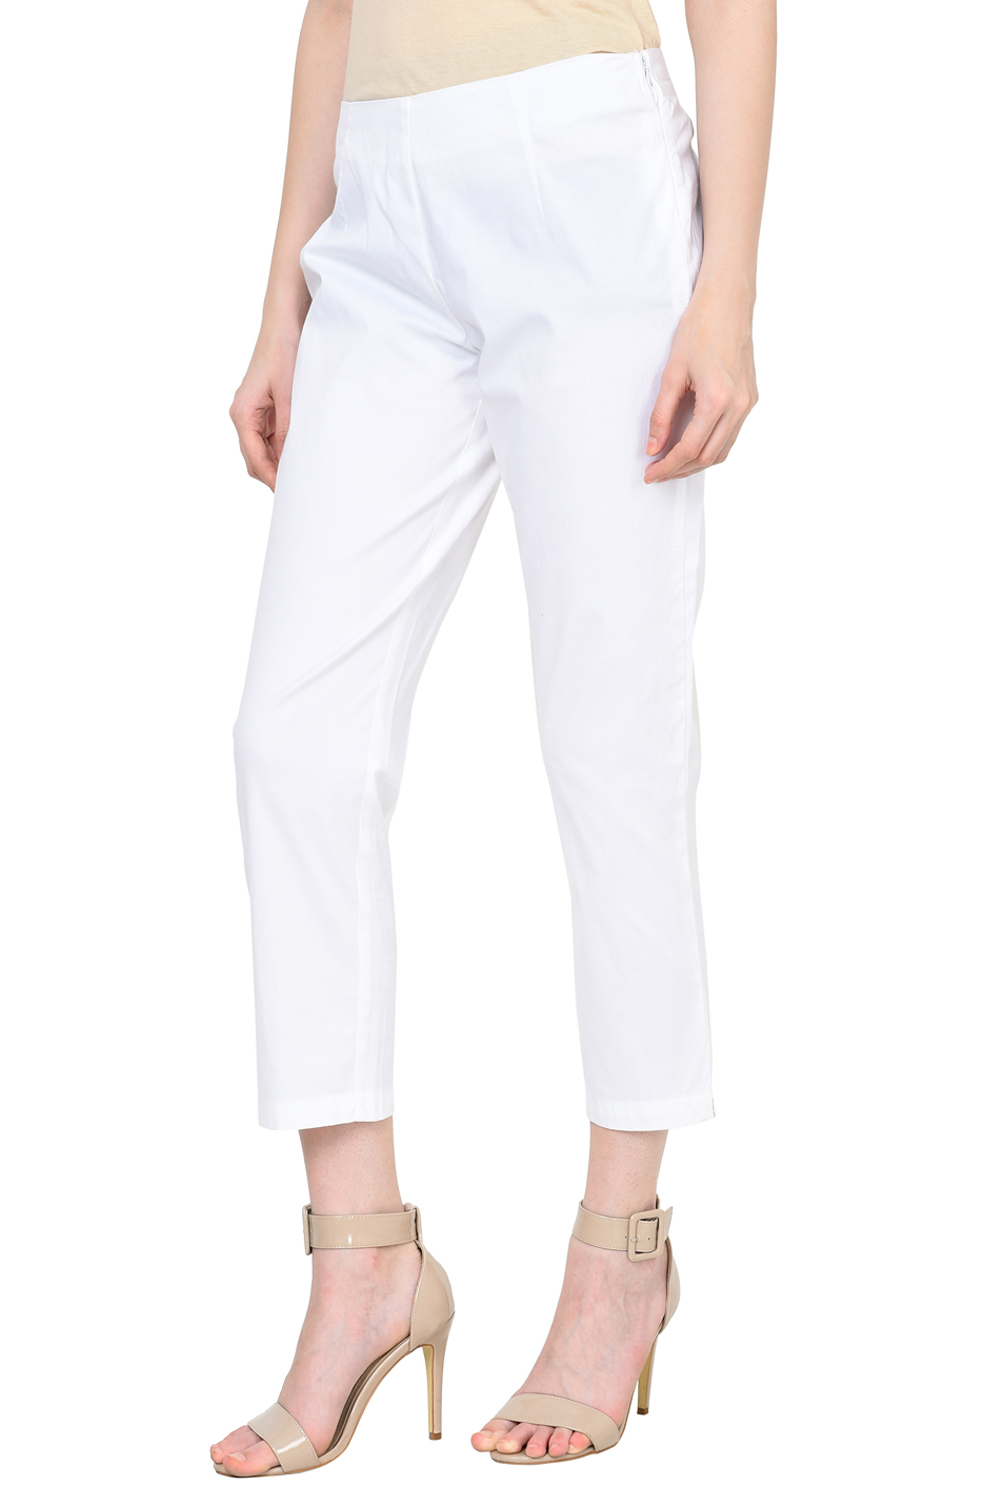 Light Pink Cotton Fusion Pants image number 2